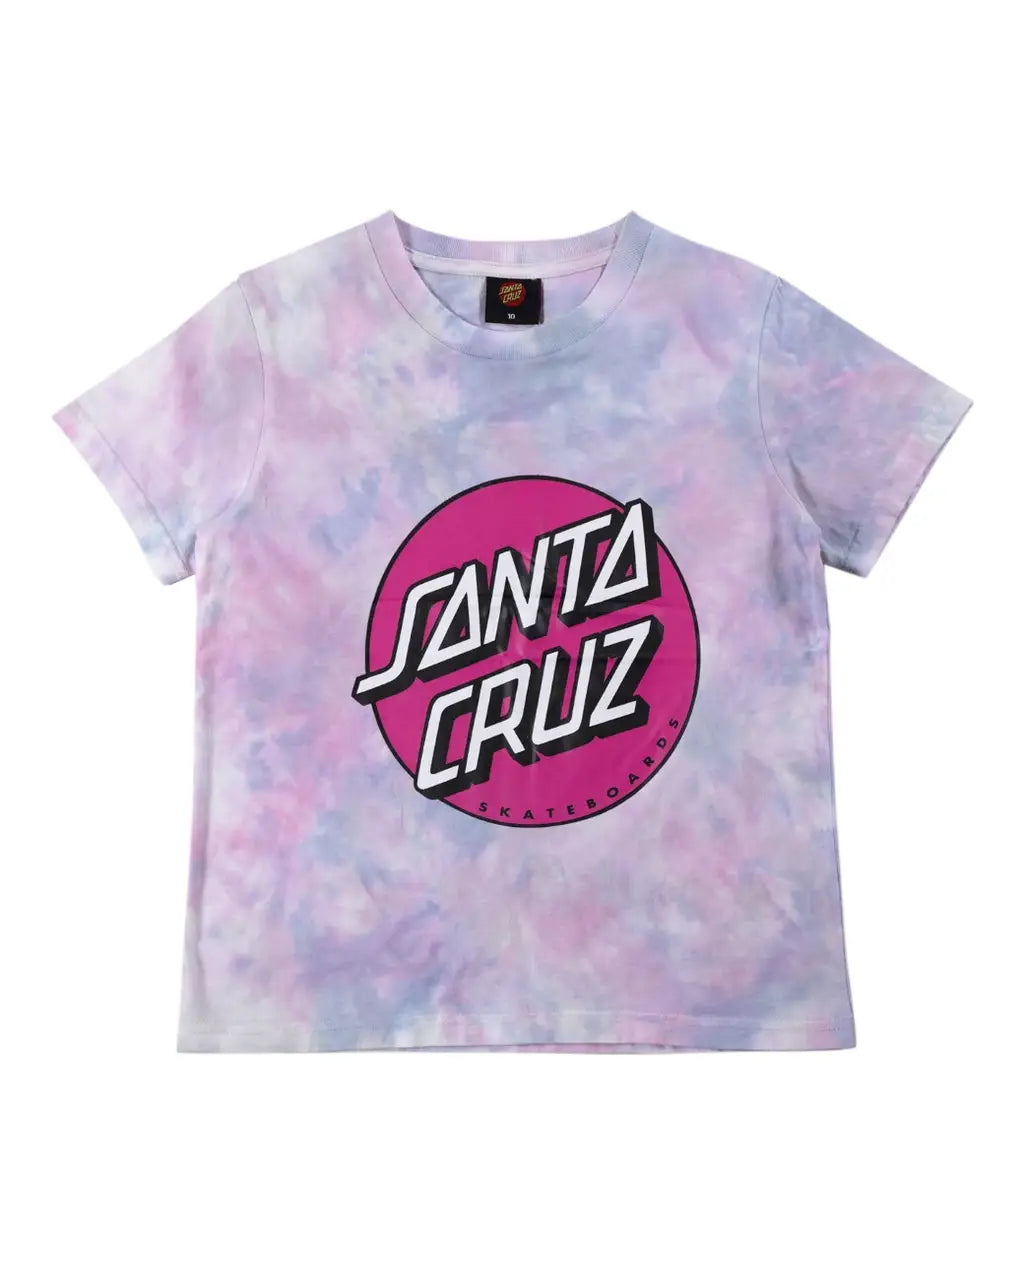 OTHER DOT FRONT TIE DYE TEE